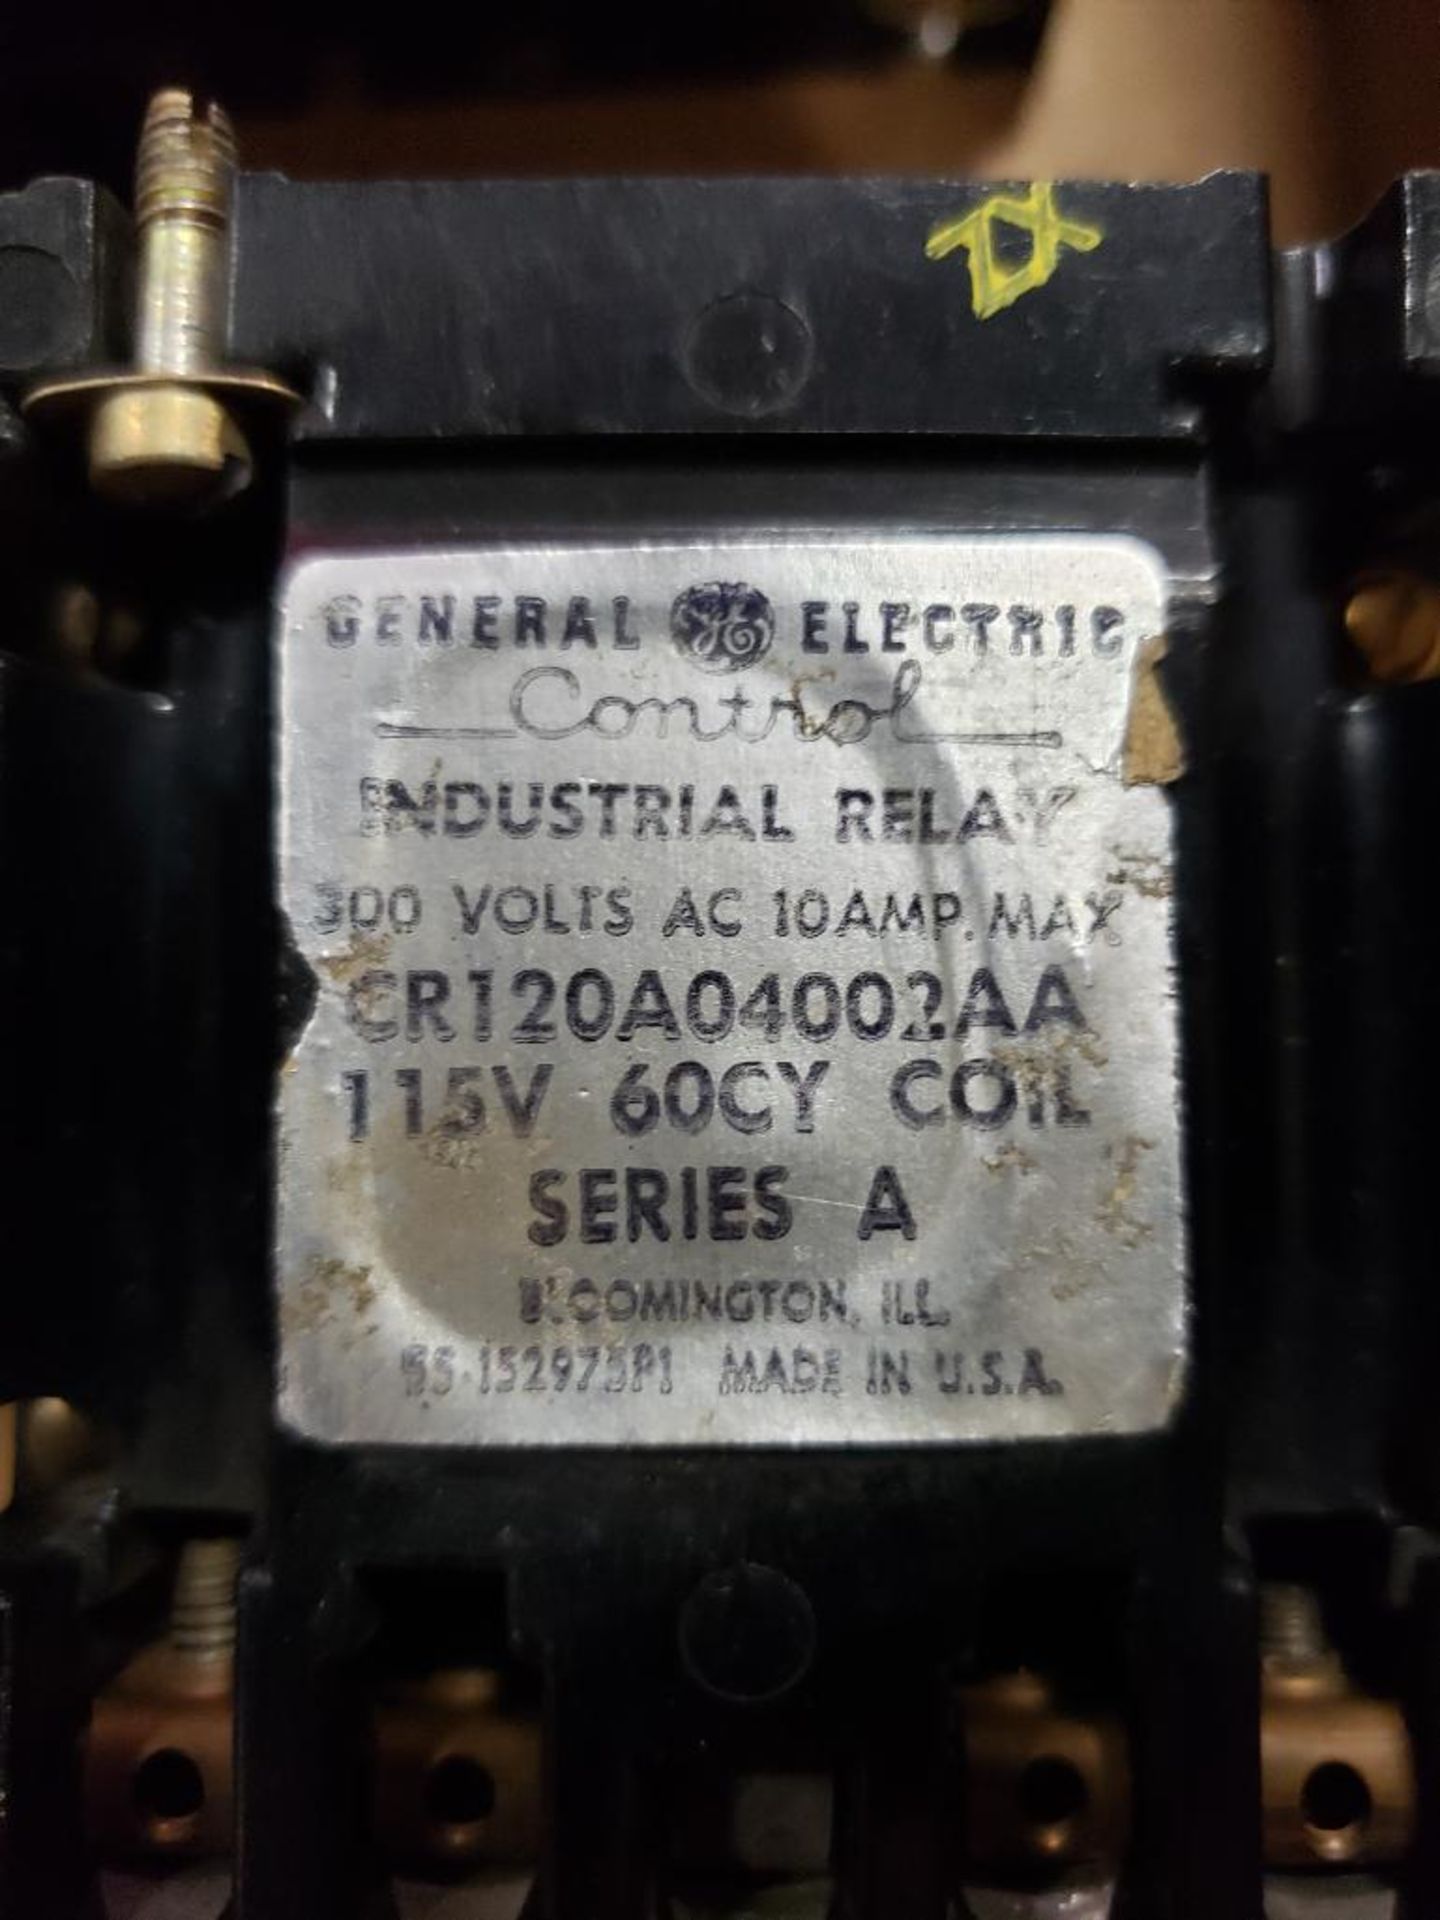 Qty 6 - GE CR120A04002AA industrial relay. - Image 3 of 3